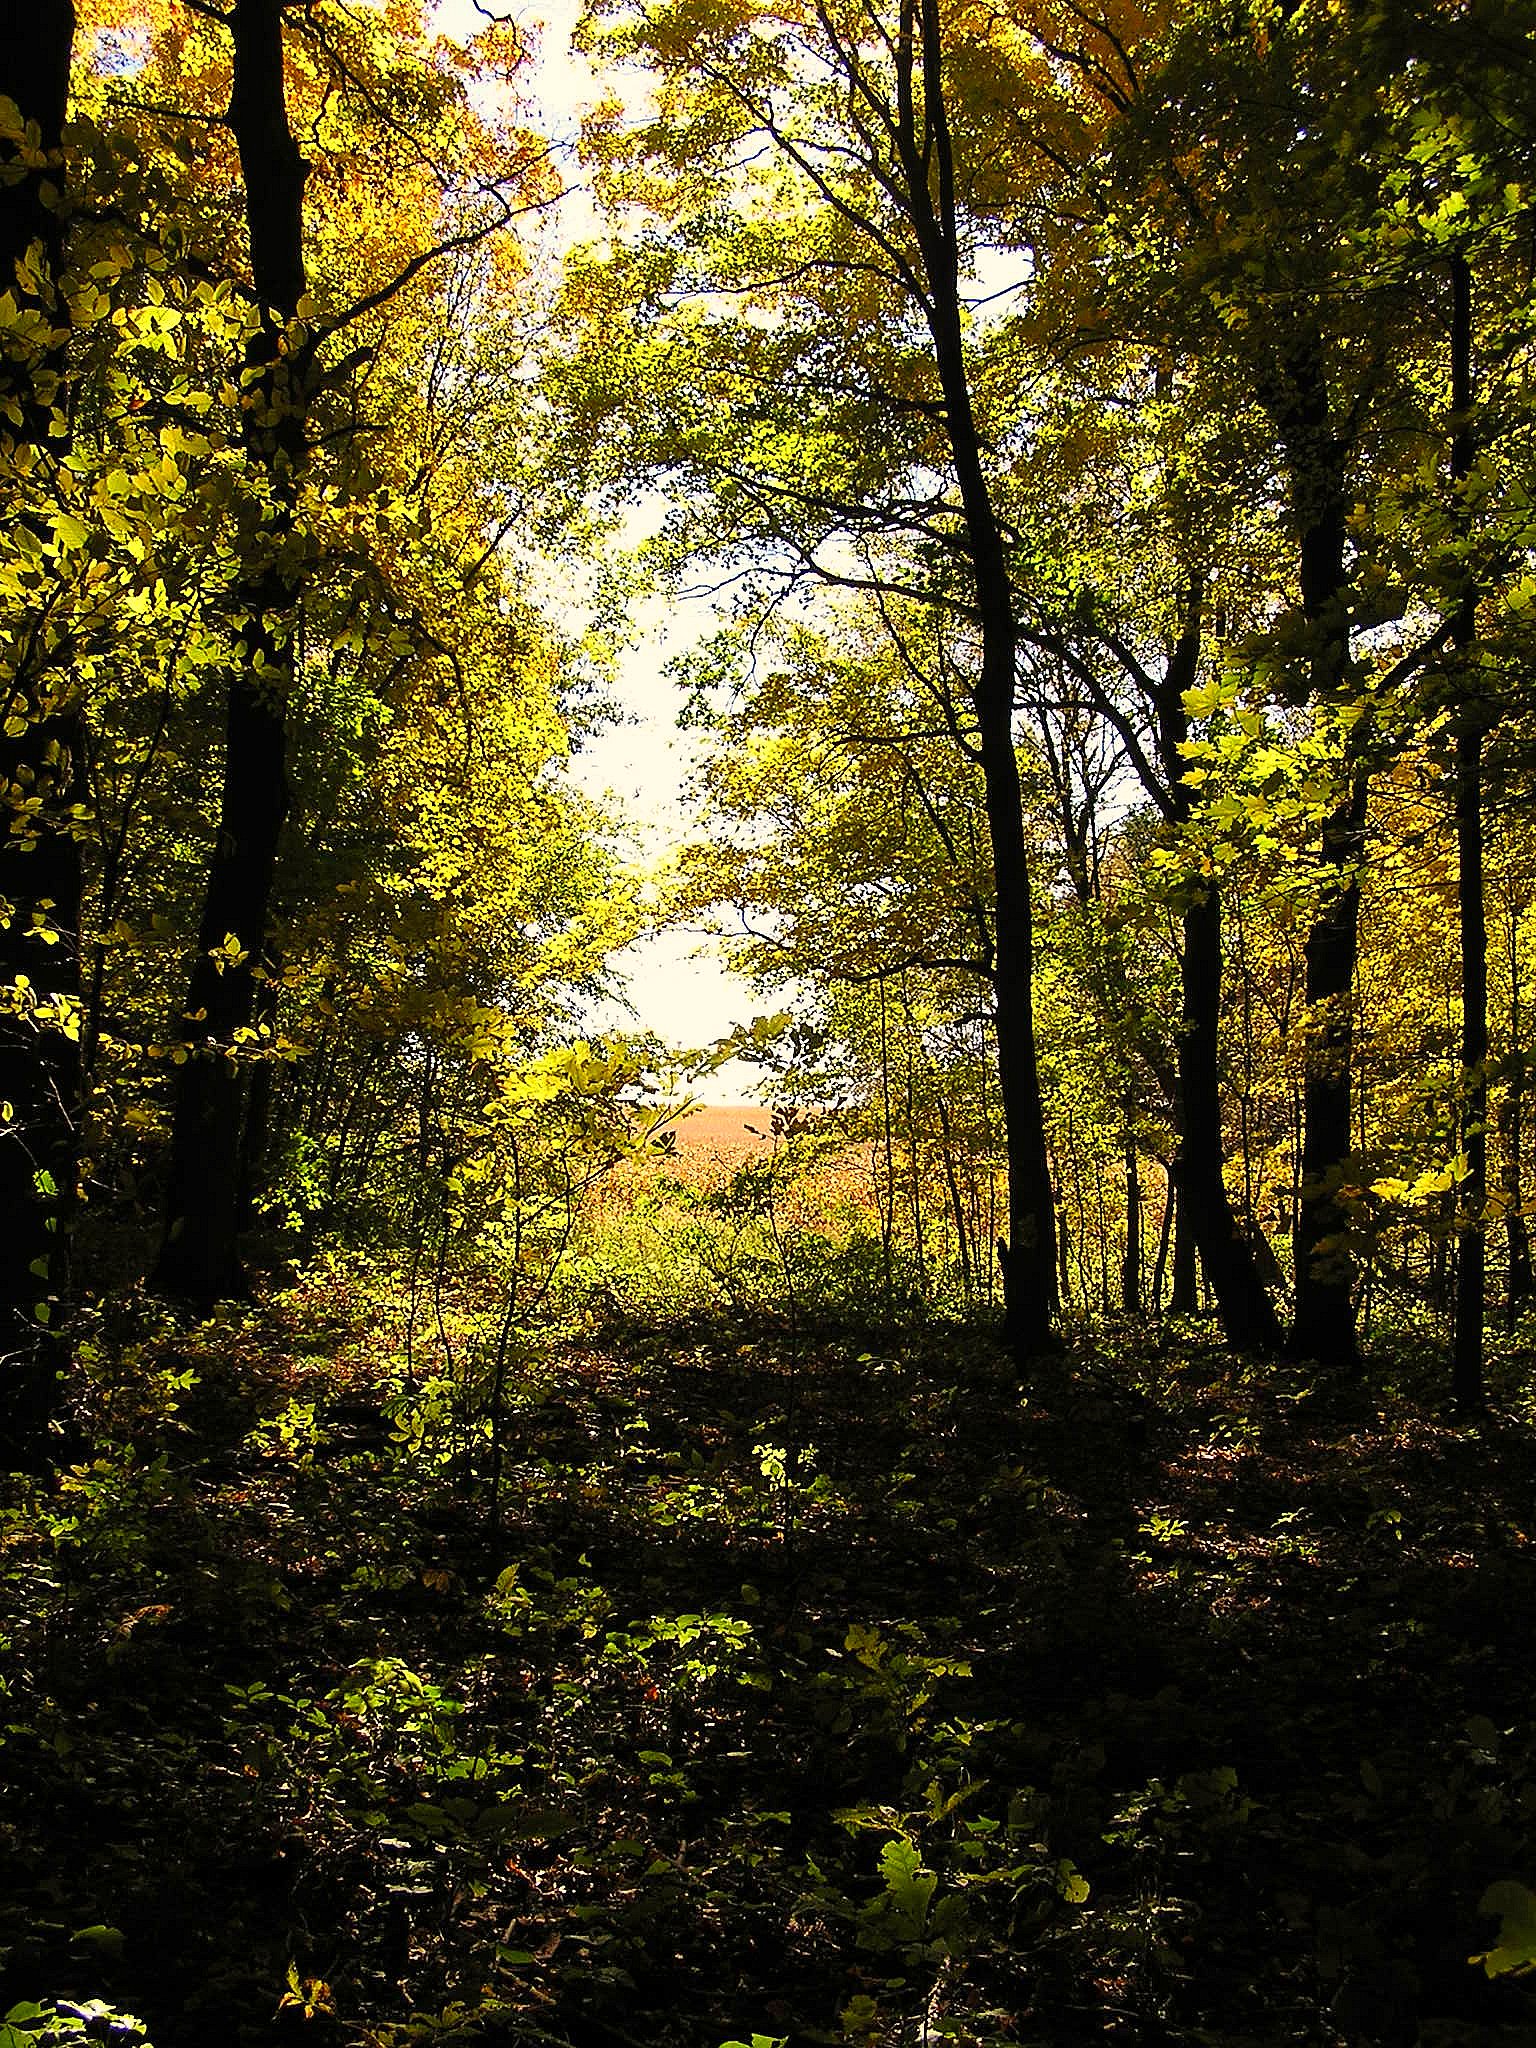 an image of some trees and leaves in the woods